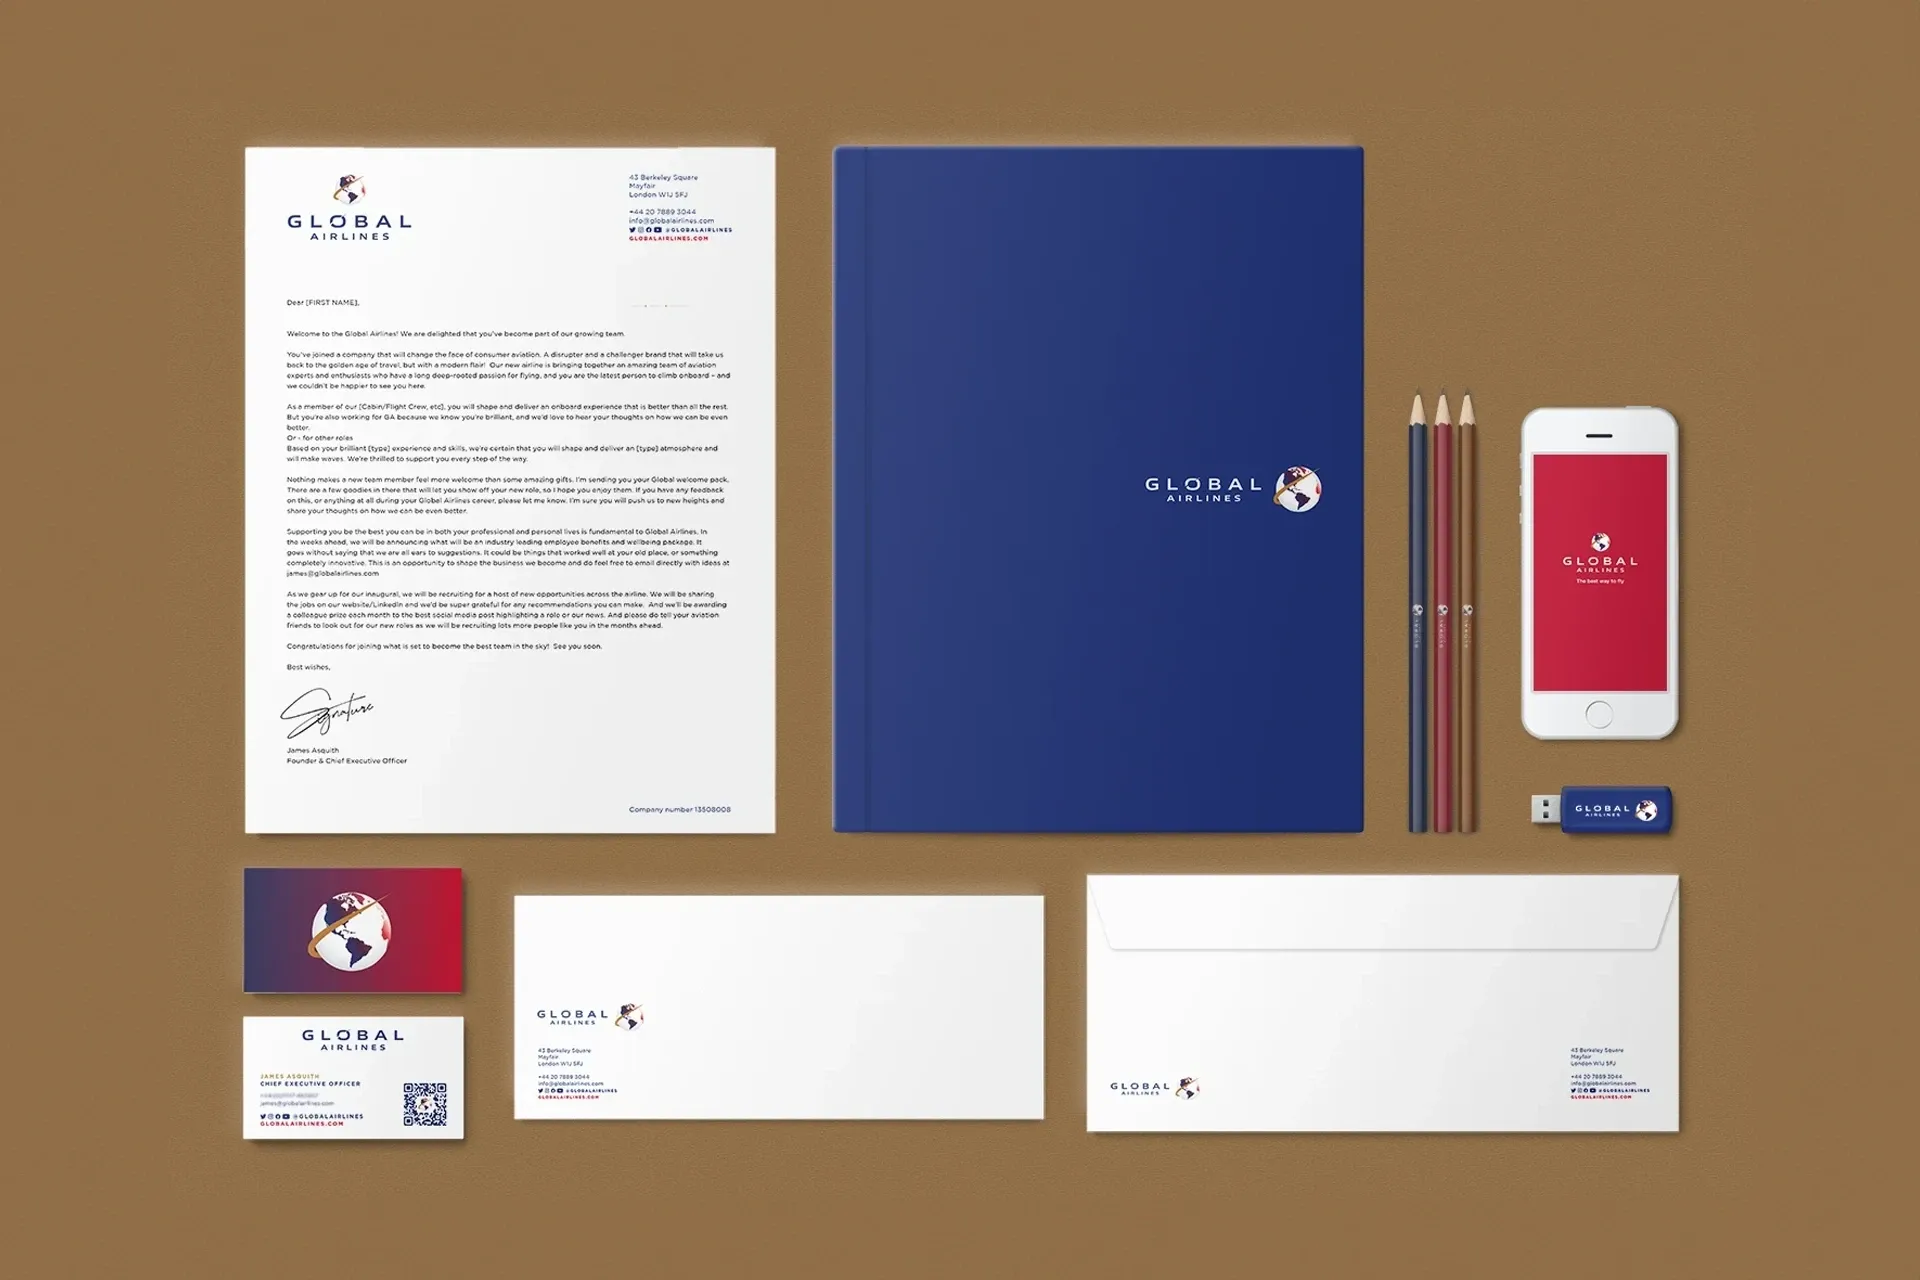 SGlobal Airlines' Stationery